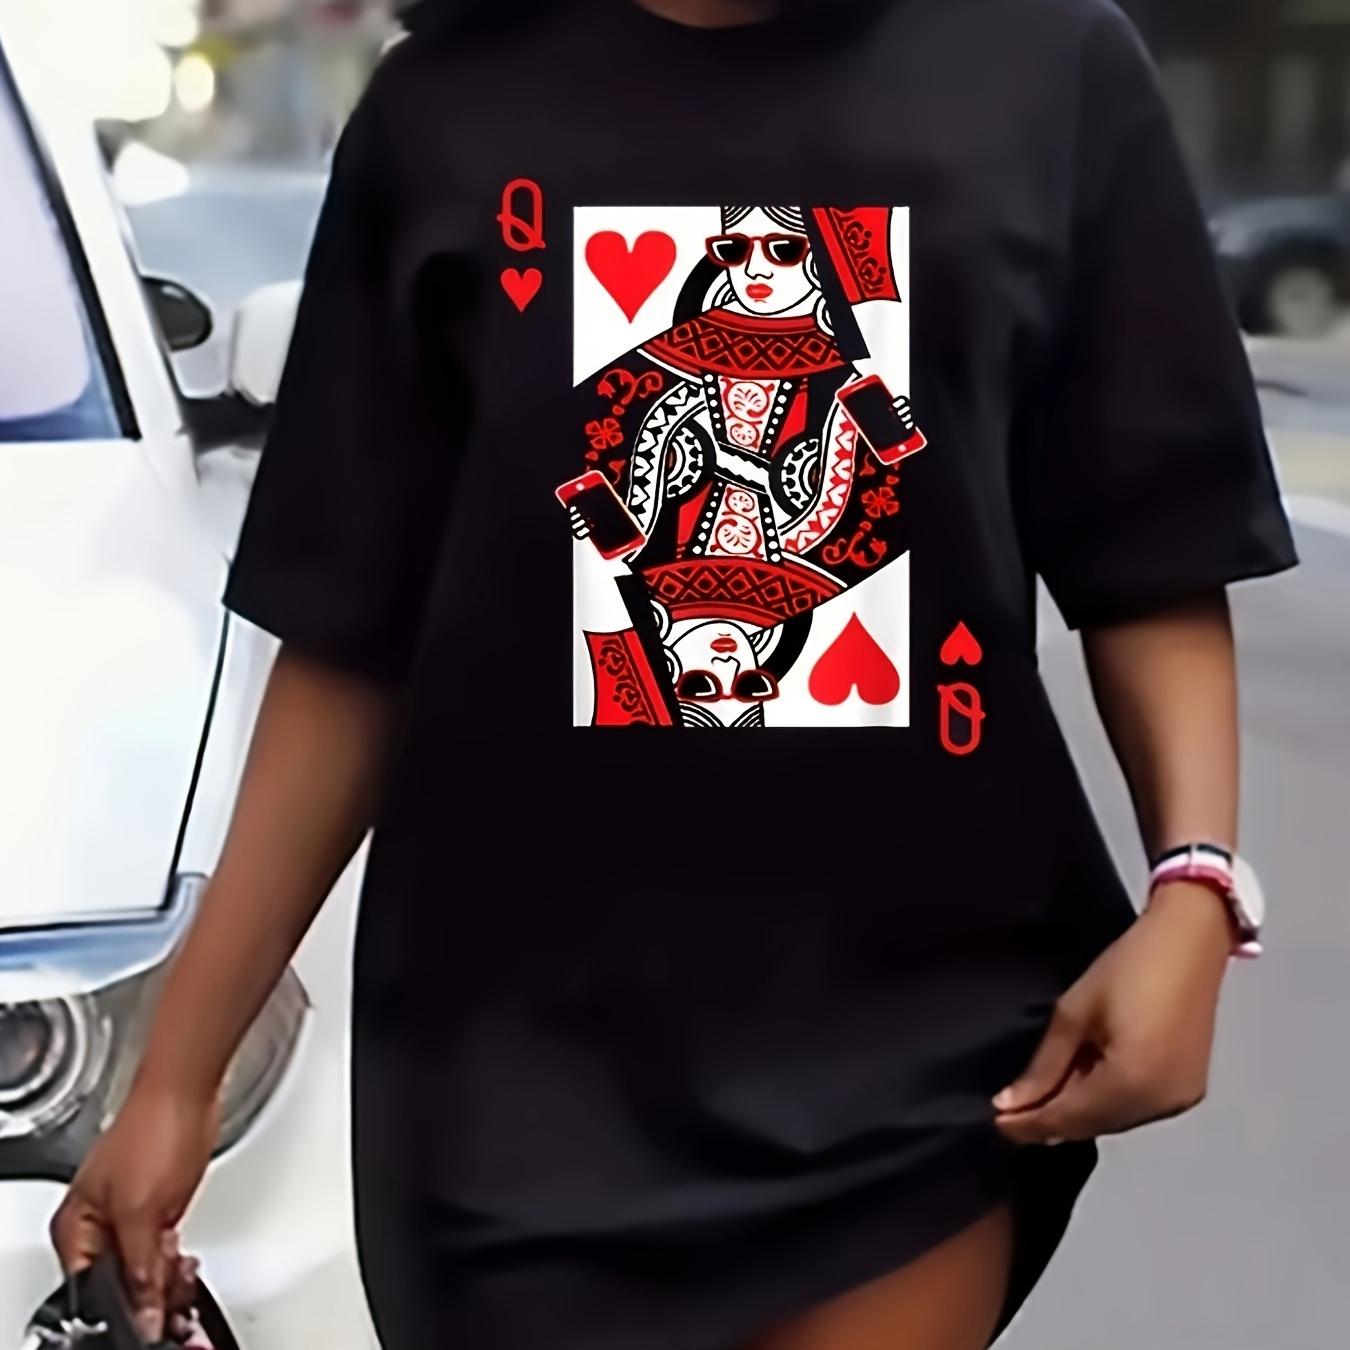 

Poker Card Graphic Print Tee Dress, Short Sleeve Crew Neck Casual Dress For Summer & Spring, Women's Clothing